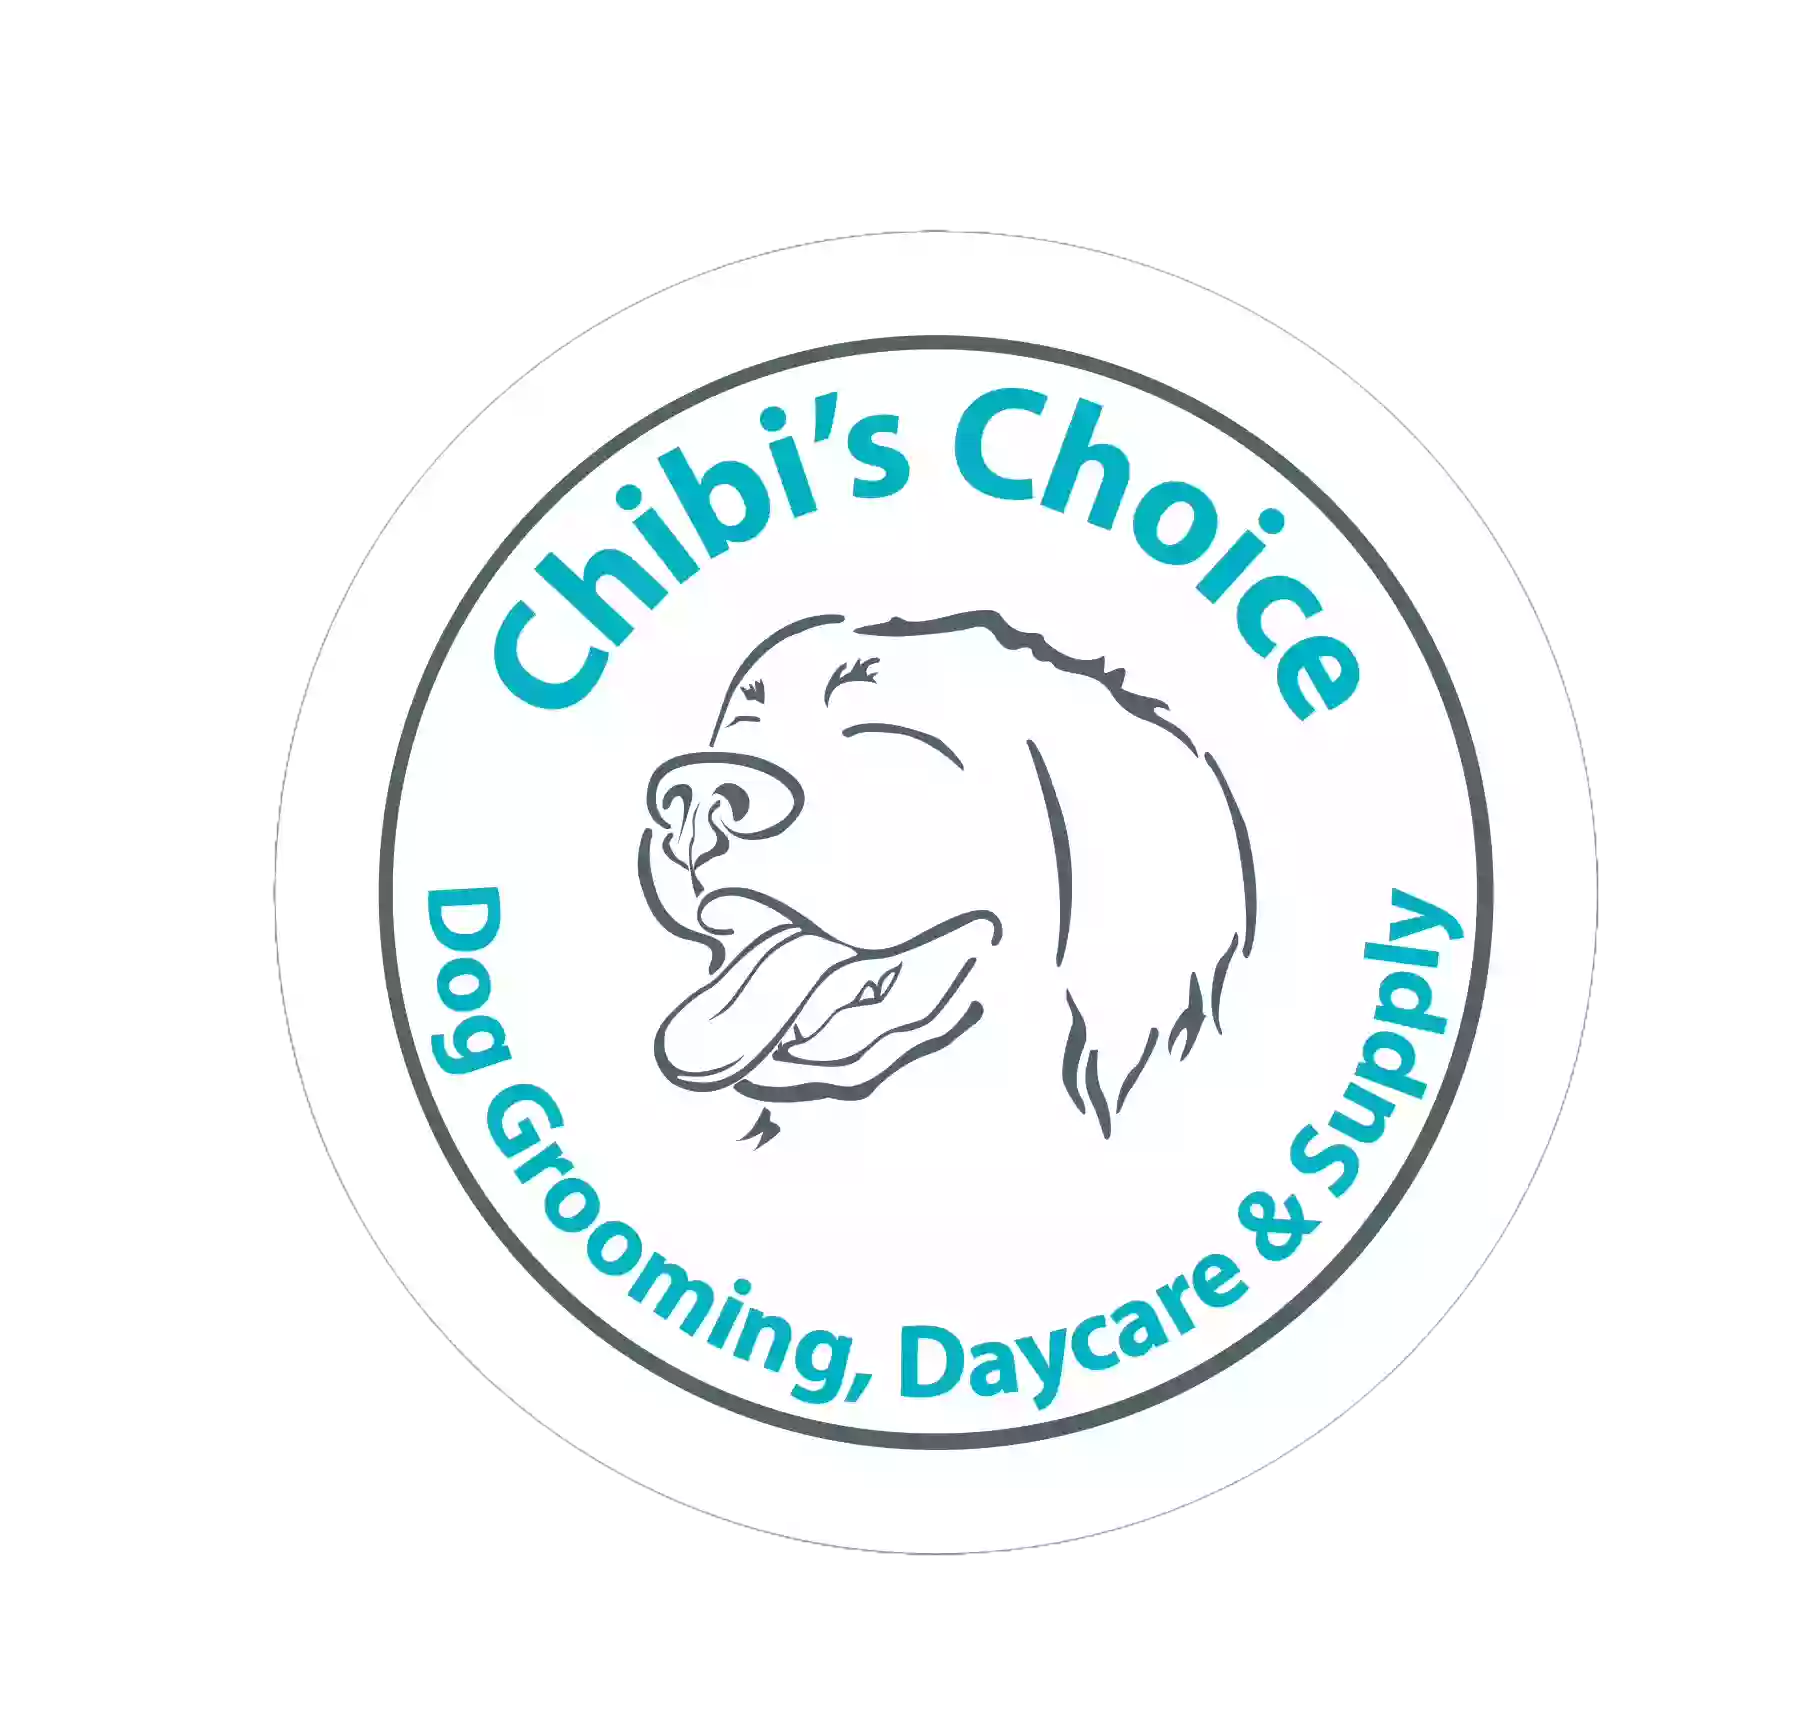 Chibi's Choice Dog Grooming, Daycare & Supply